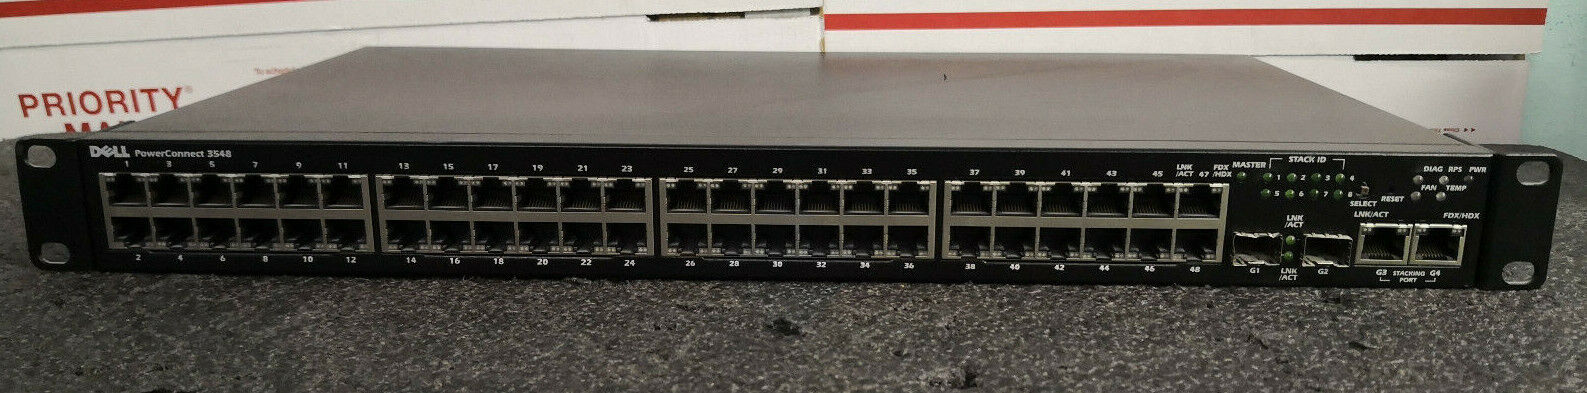 Dell PowerConnect 3548 48-Port 10/100 Fully Managed Switch with Rack Ears #i506